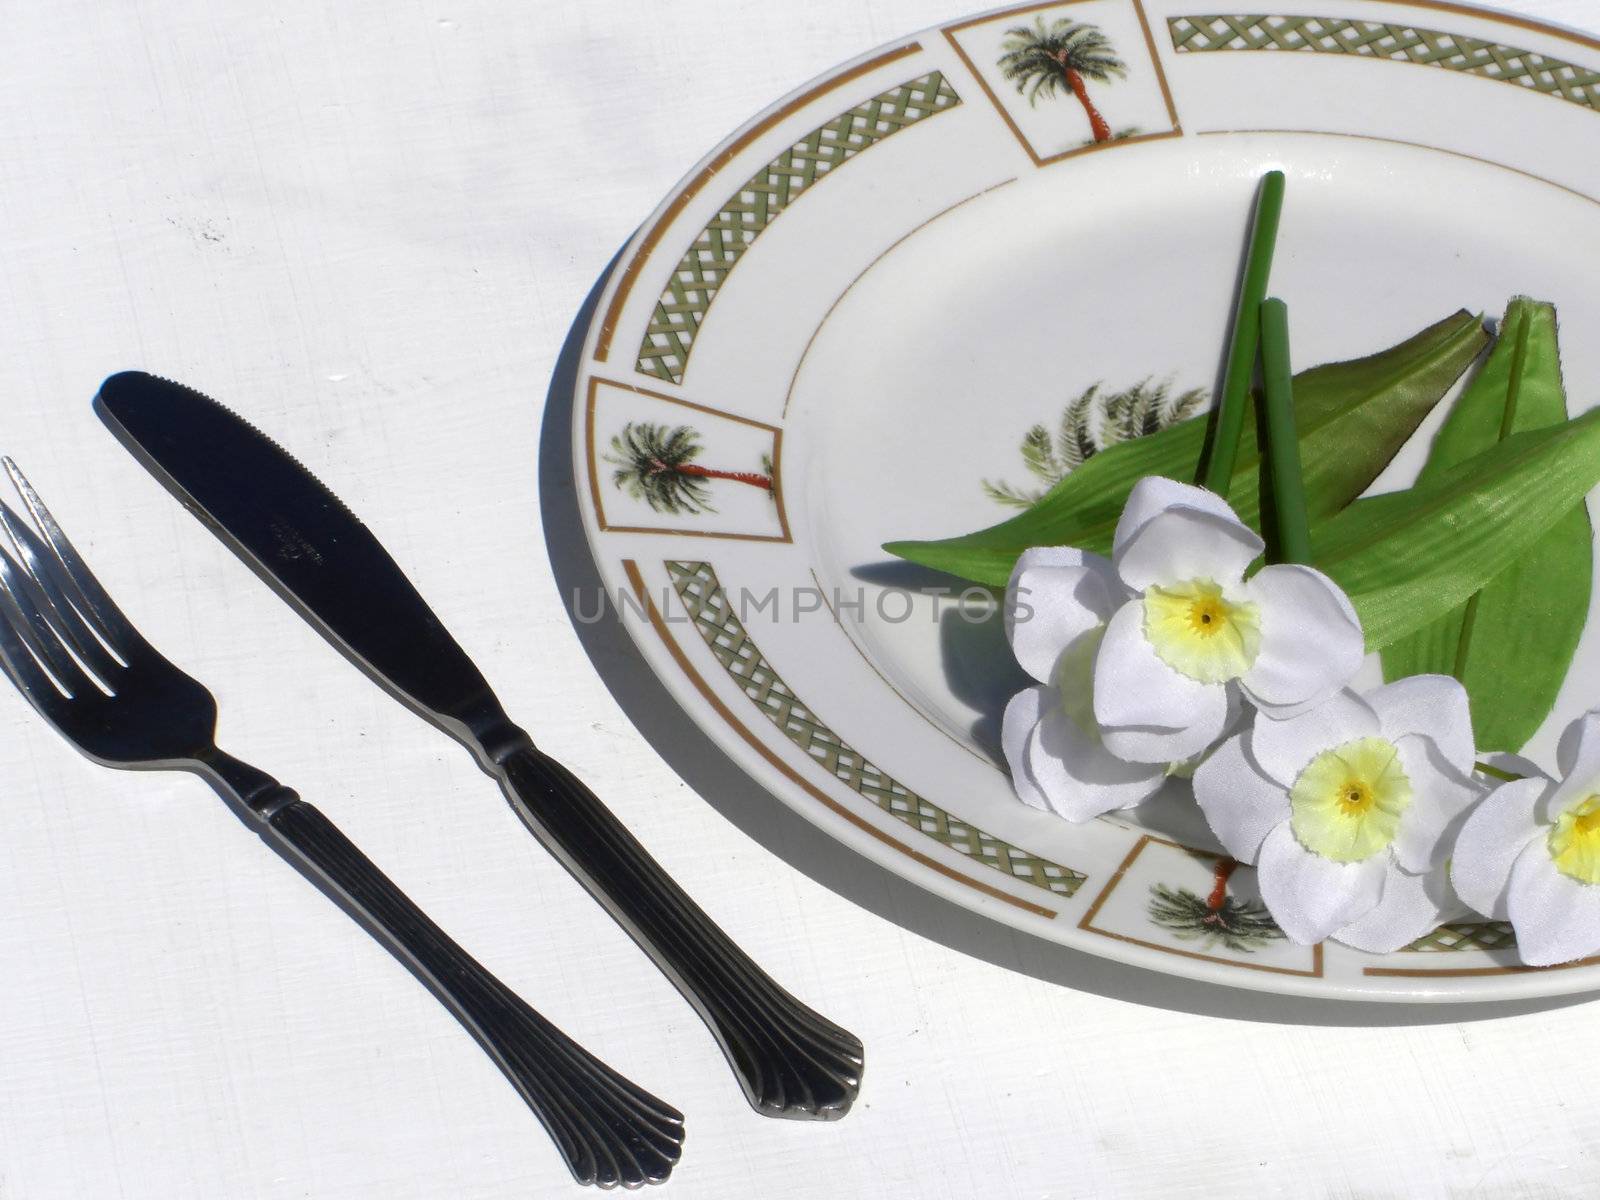 A plate with palm trees flowers, a knife and fork signify good service, entertainment and catering.